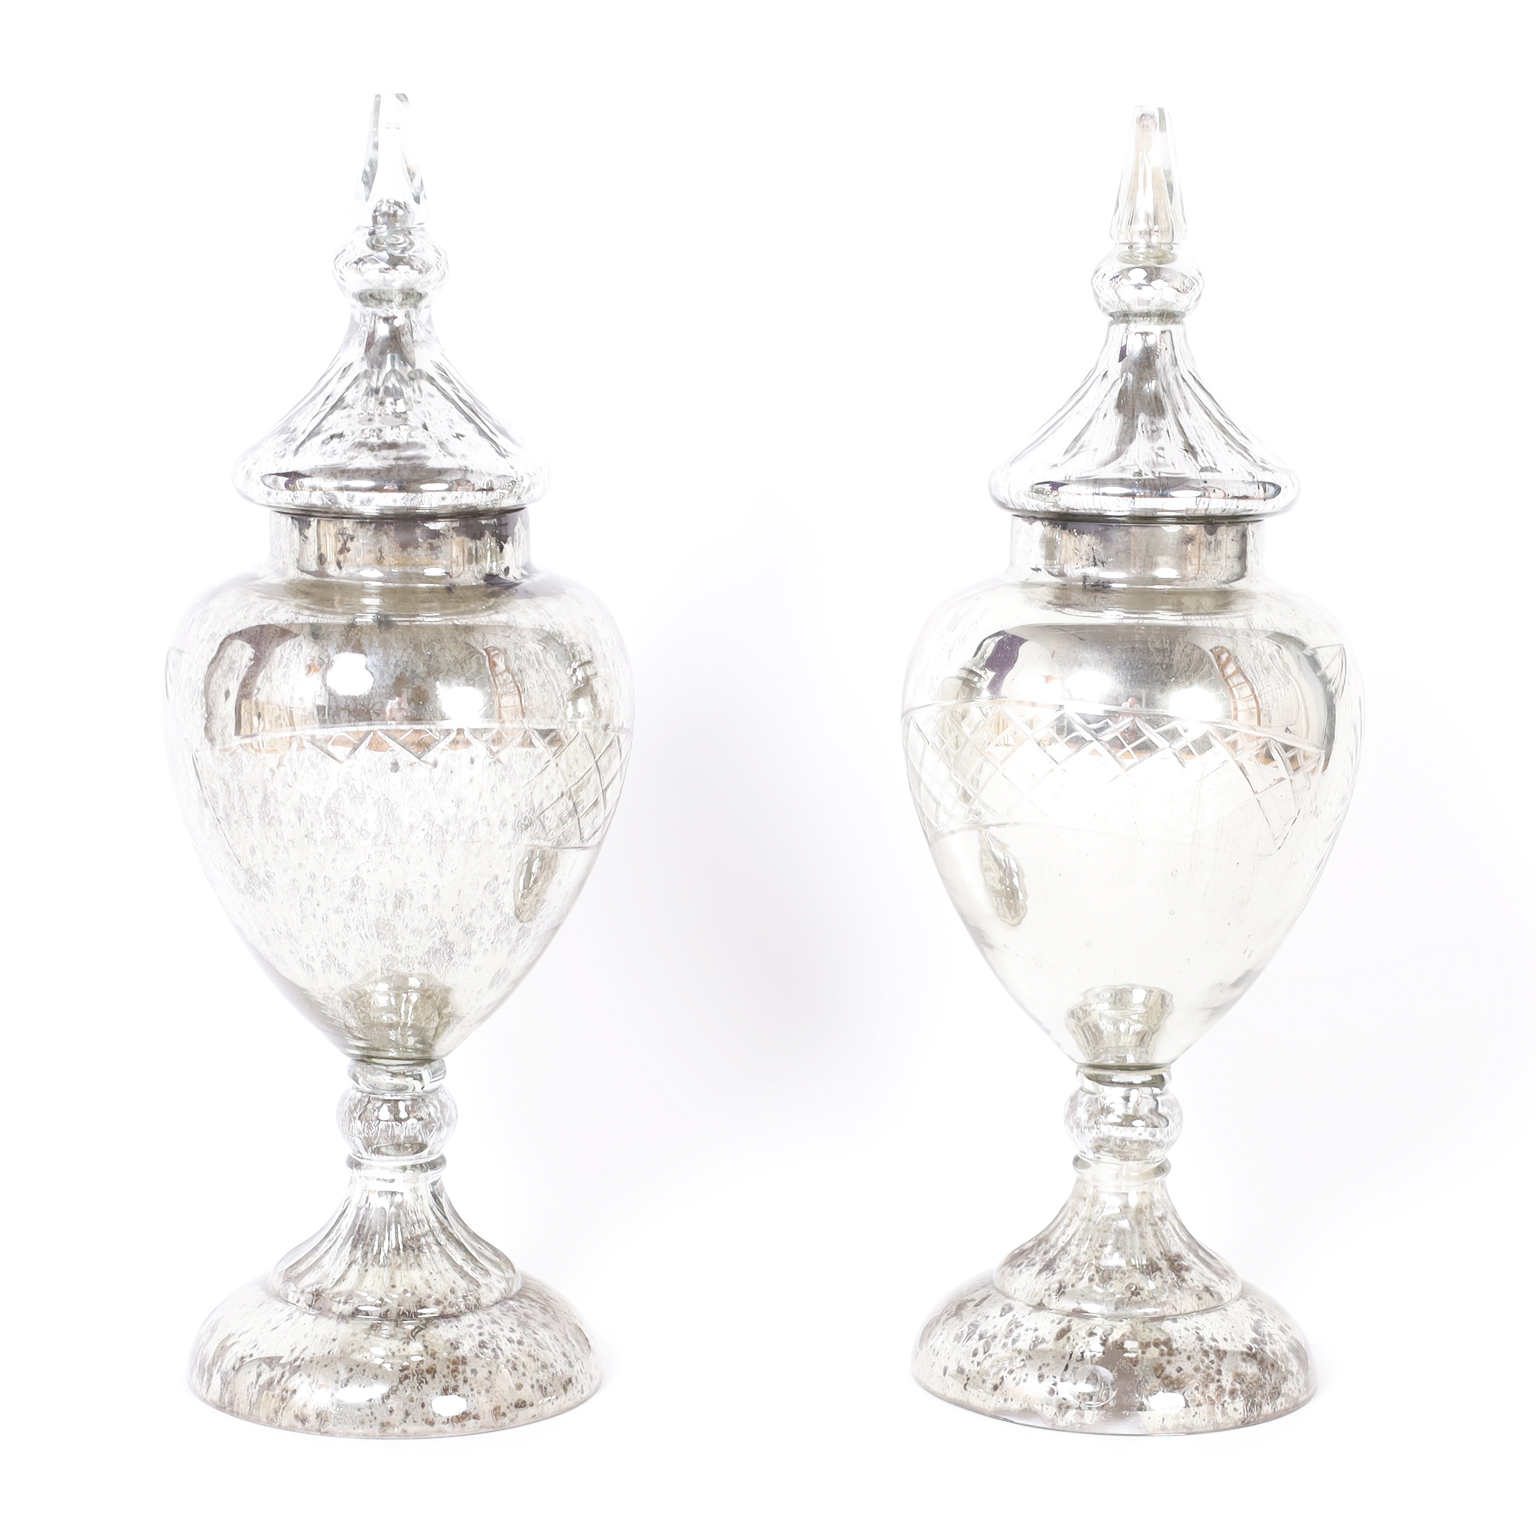 Pair of Antique Mercury Glass Apothecary Urns